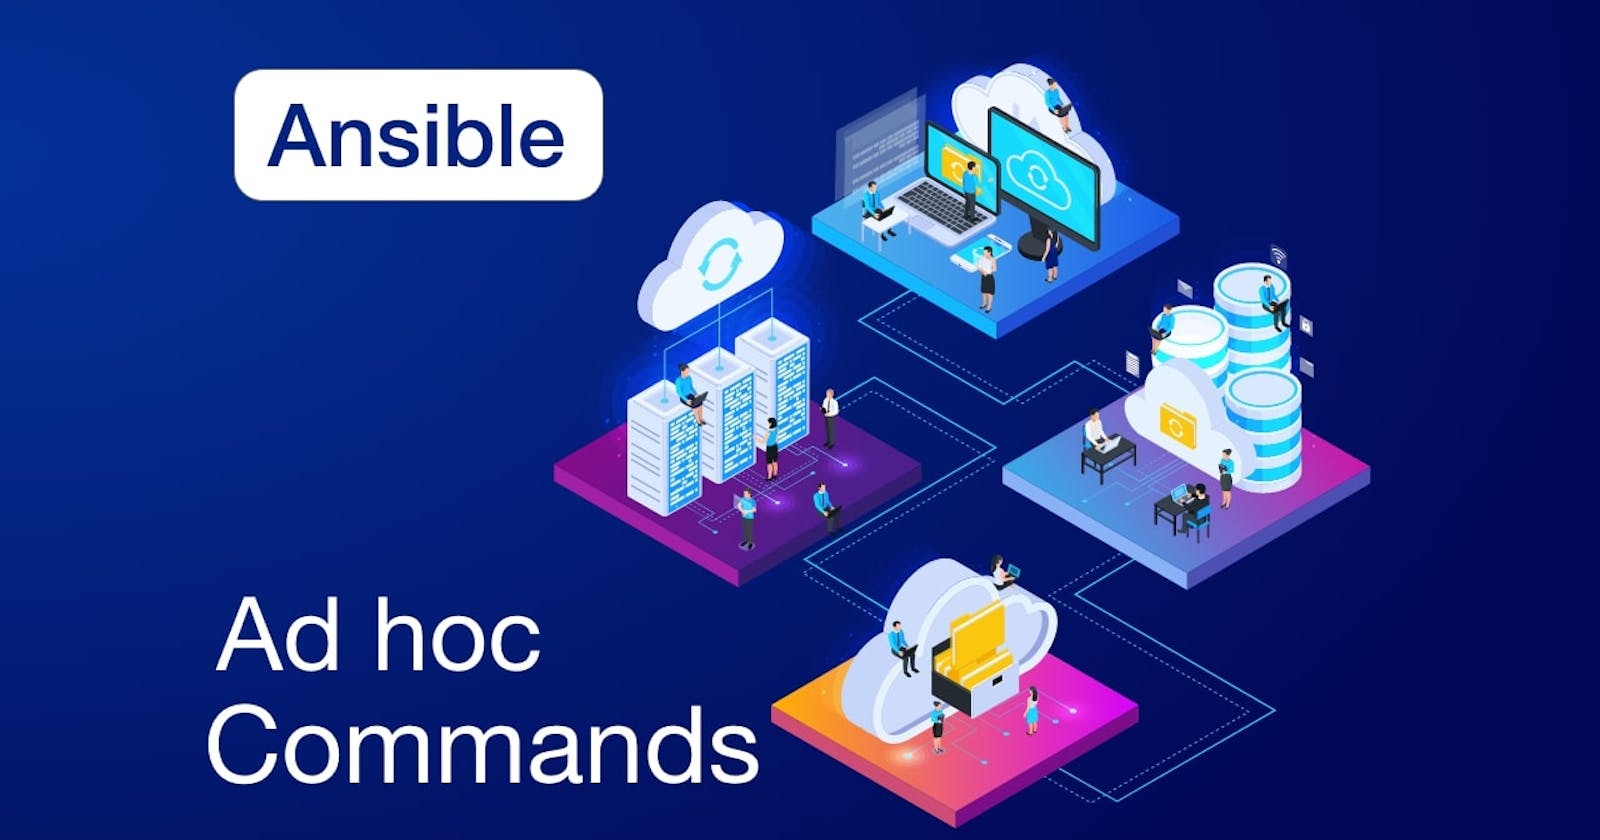 A complete guide to Ansible Ad hoc Commands